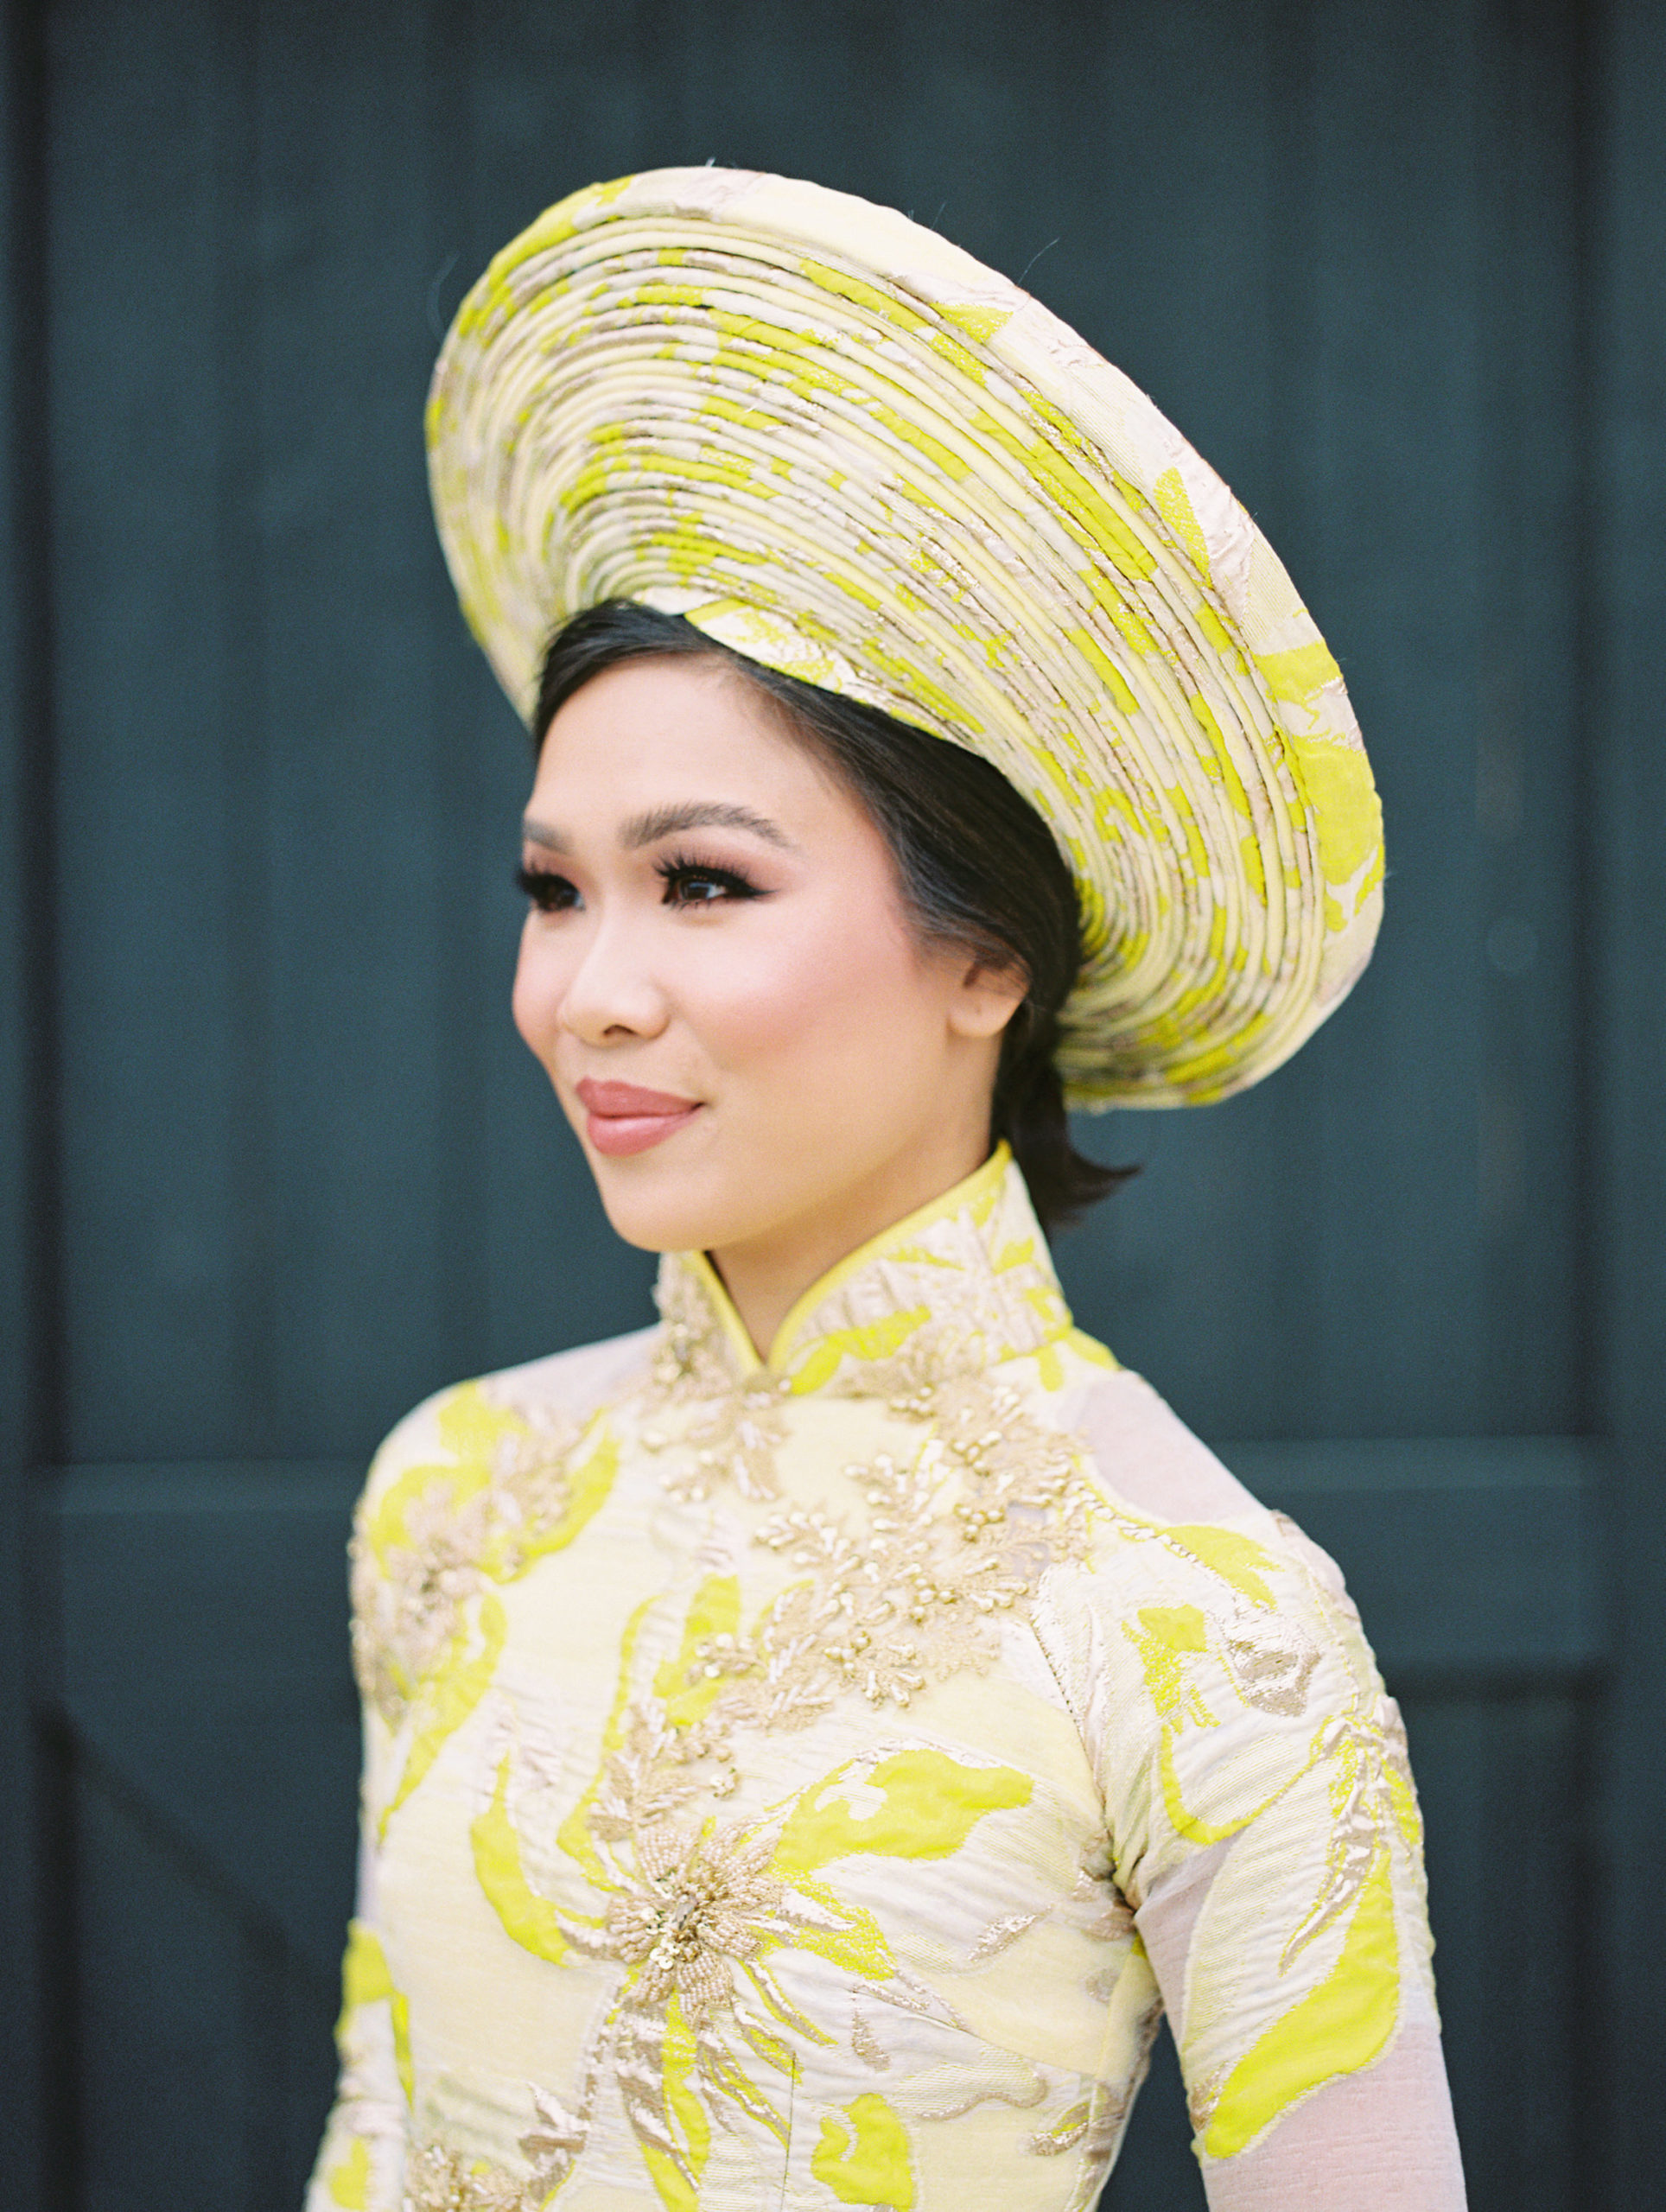 Blogger Hoang-Kim Cung wears a custom ao dai made by Thai Nguyen Atelier for her Vietnamese wedding